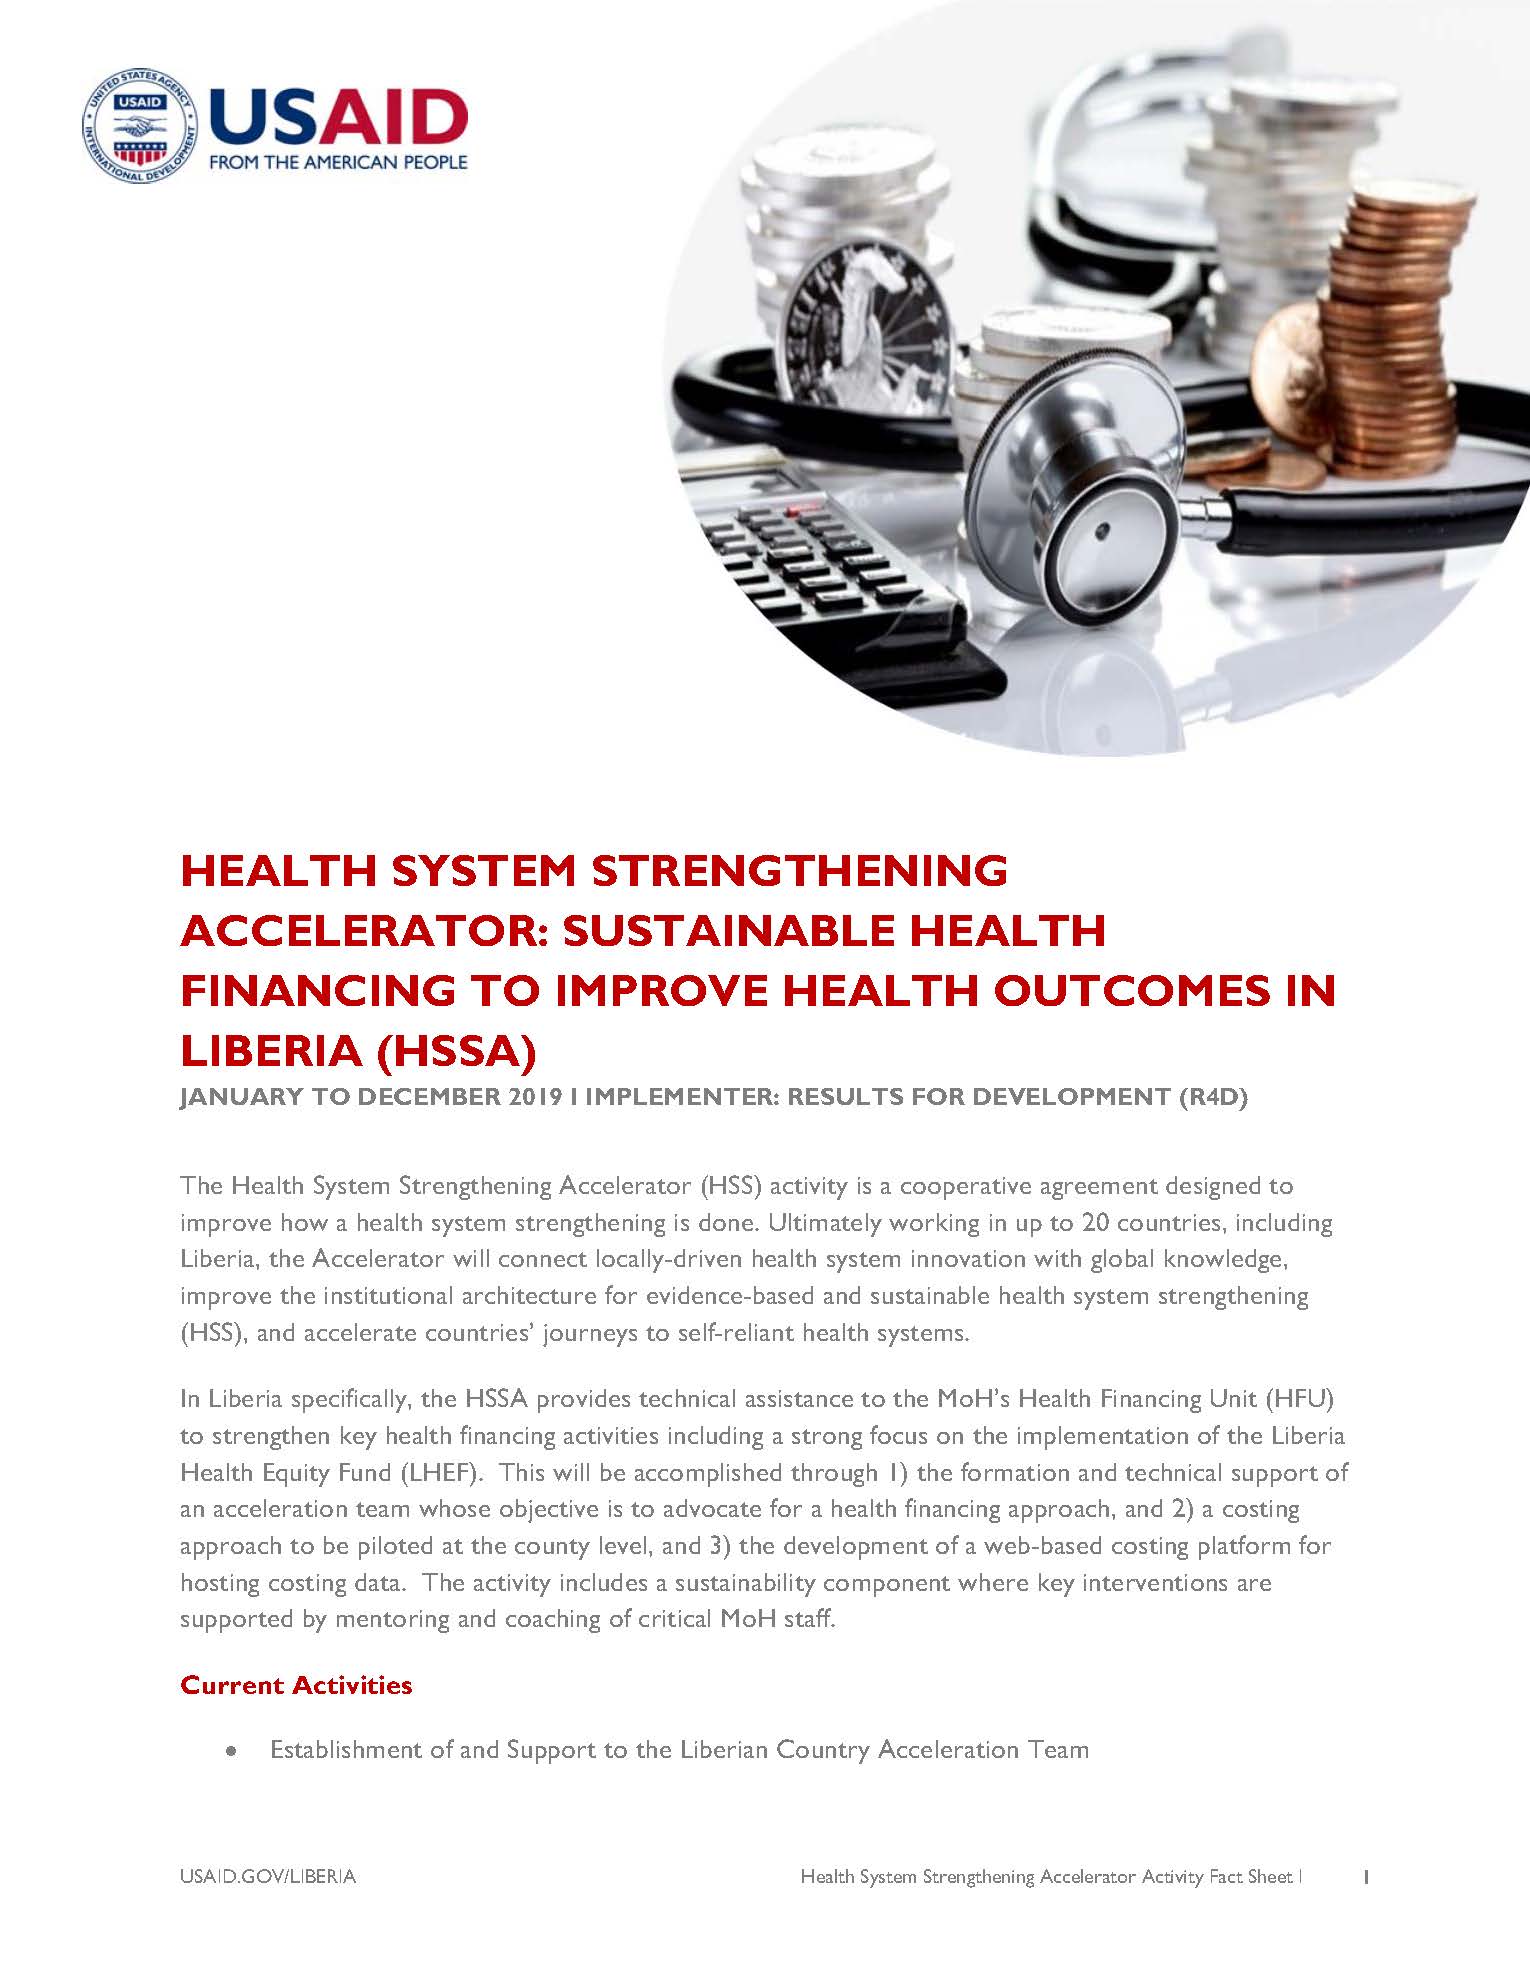 Health System Strengthening Accelerator Activity 